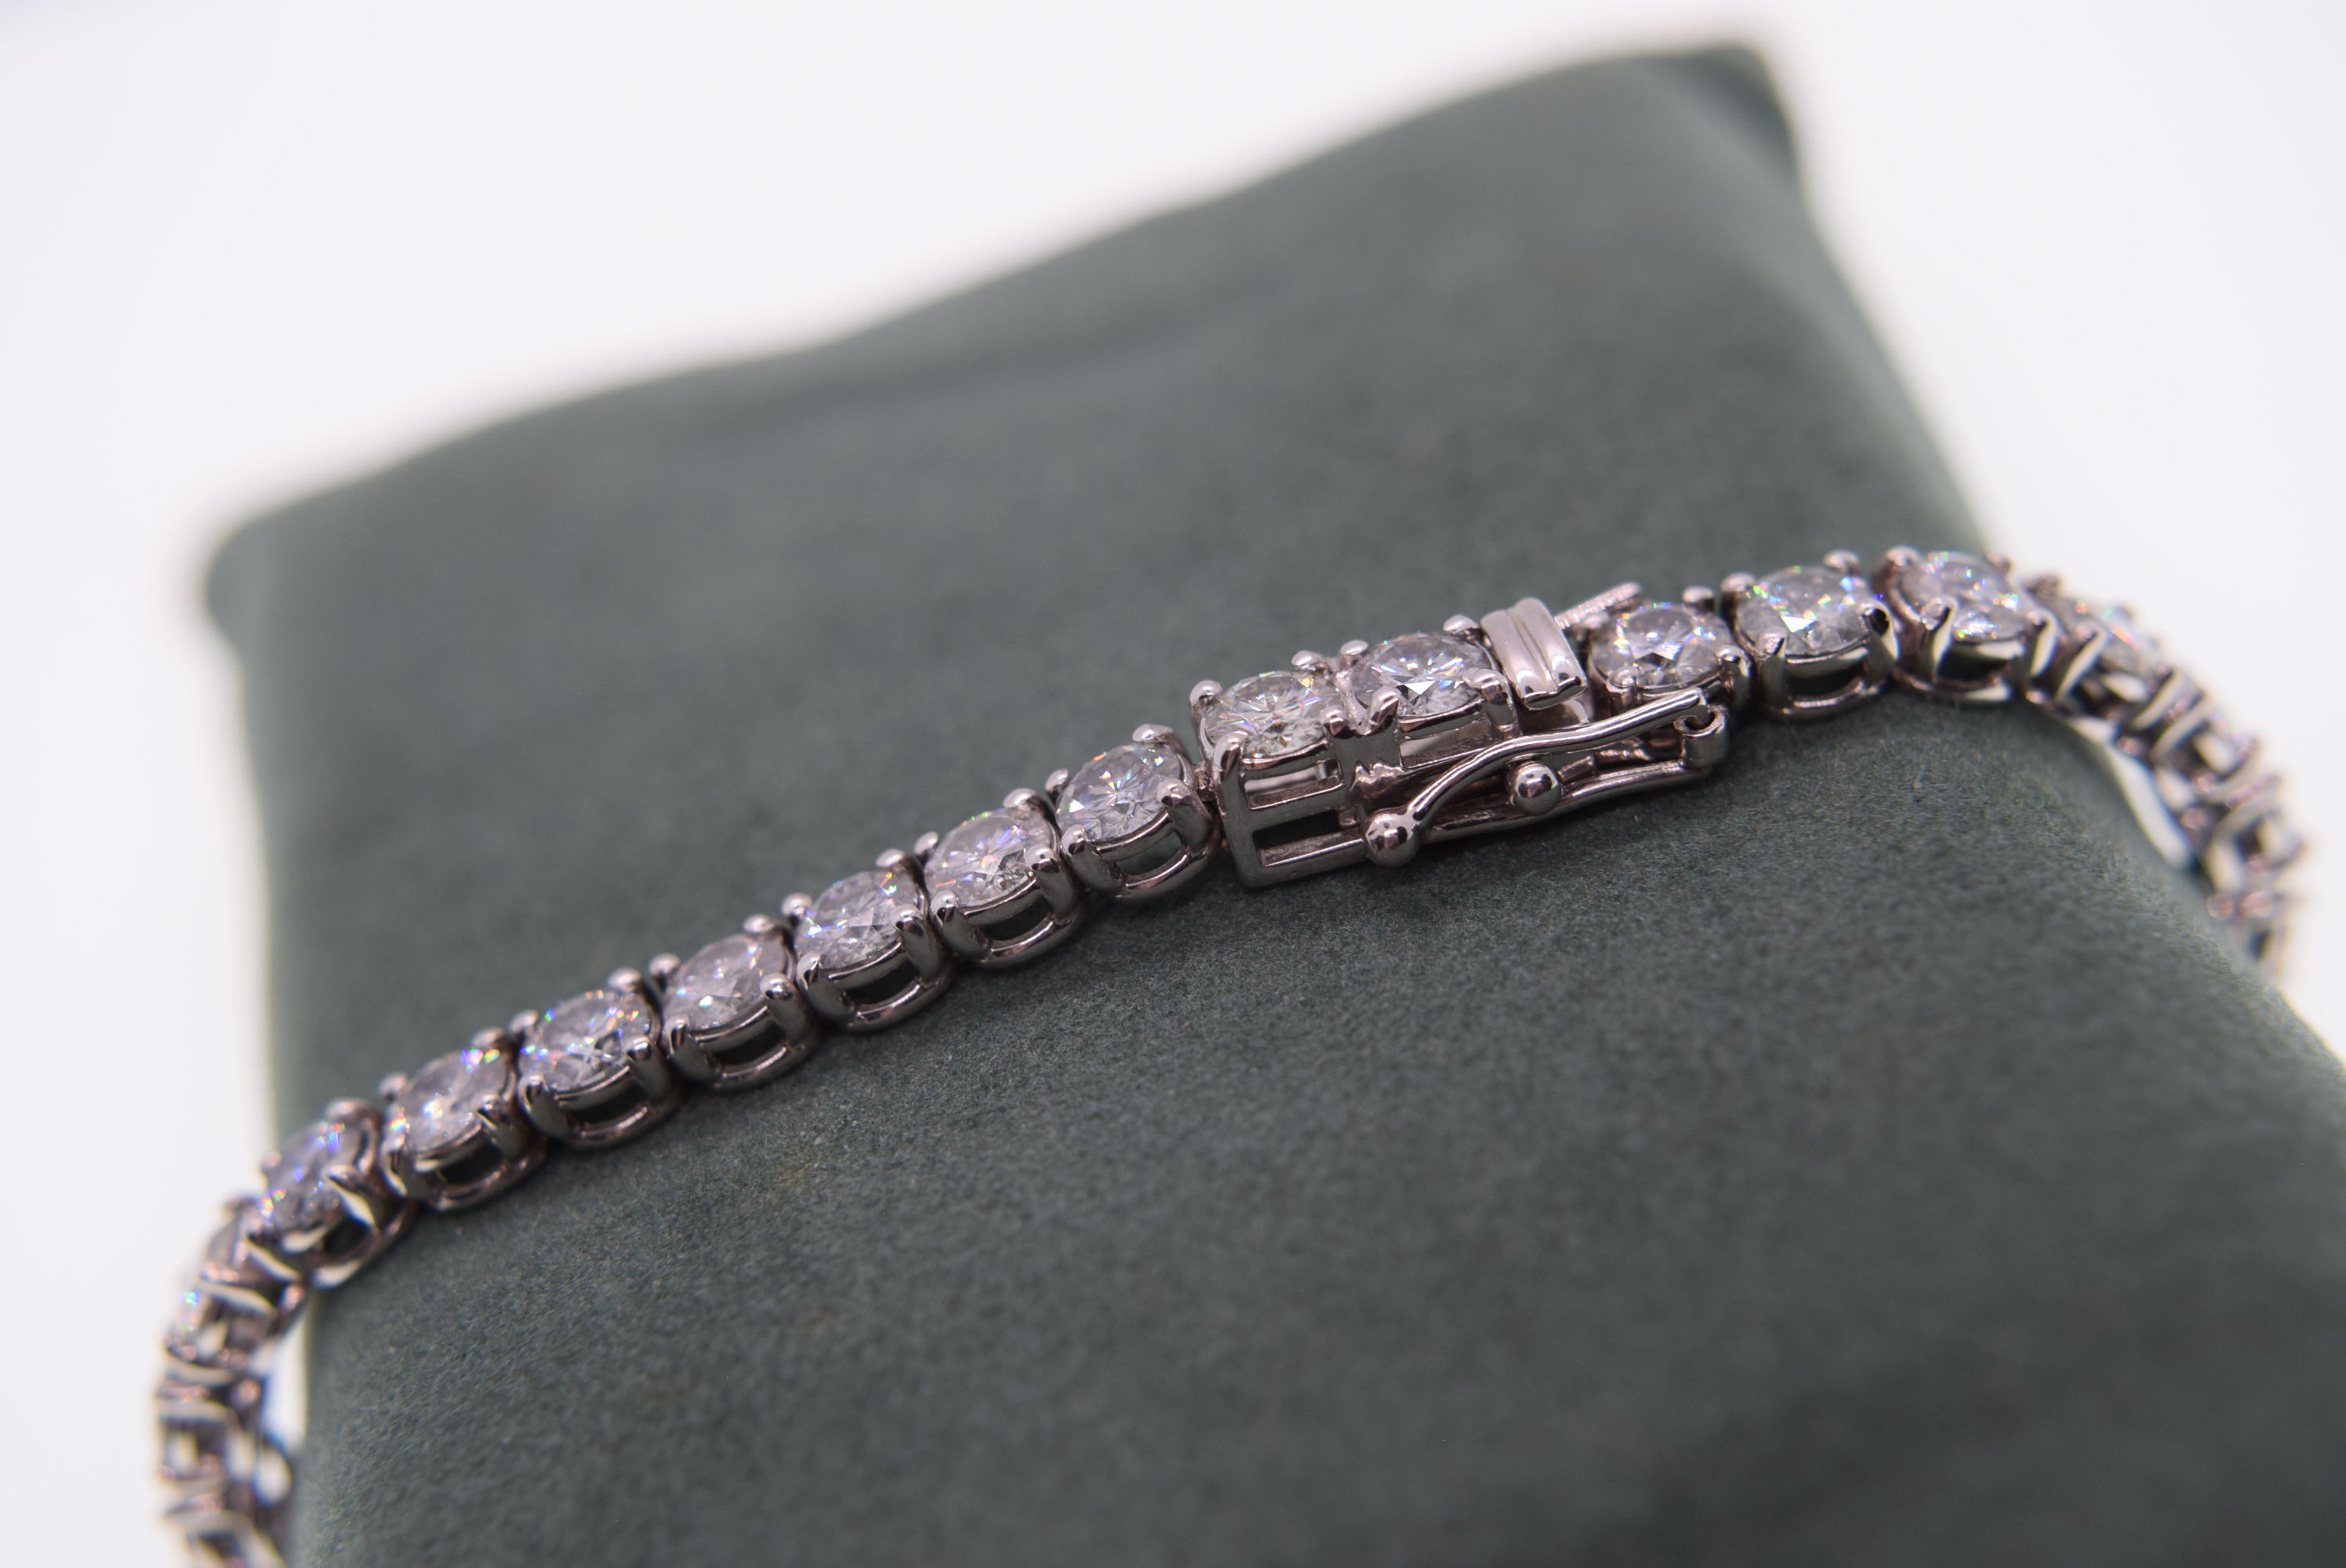 18K WHITE GOLD TENNIS BRACELET (APPROX. 14.00CT MOISSANITES) - WEIGHT: 18.4 GRAMS - Image 2 of 4